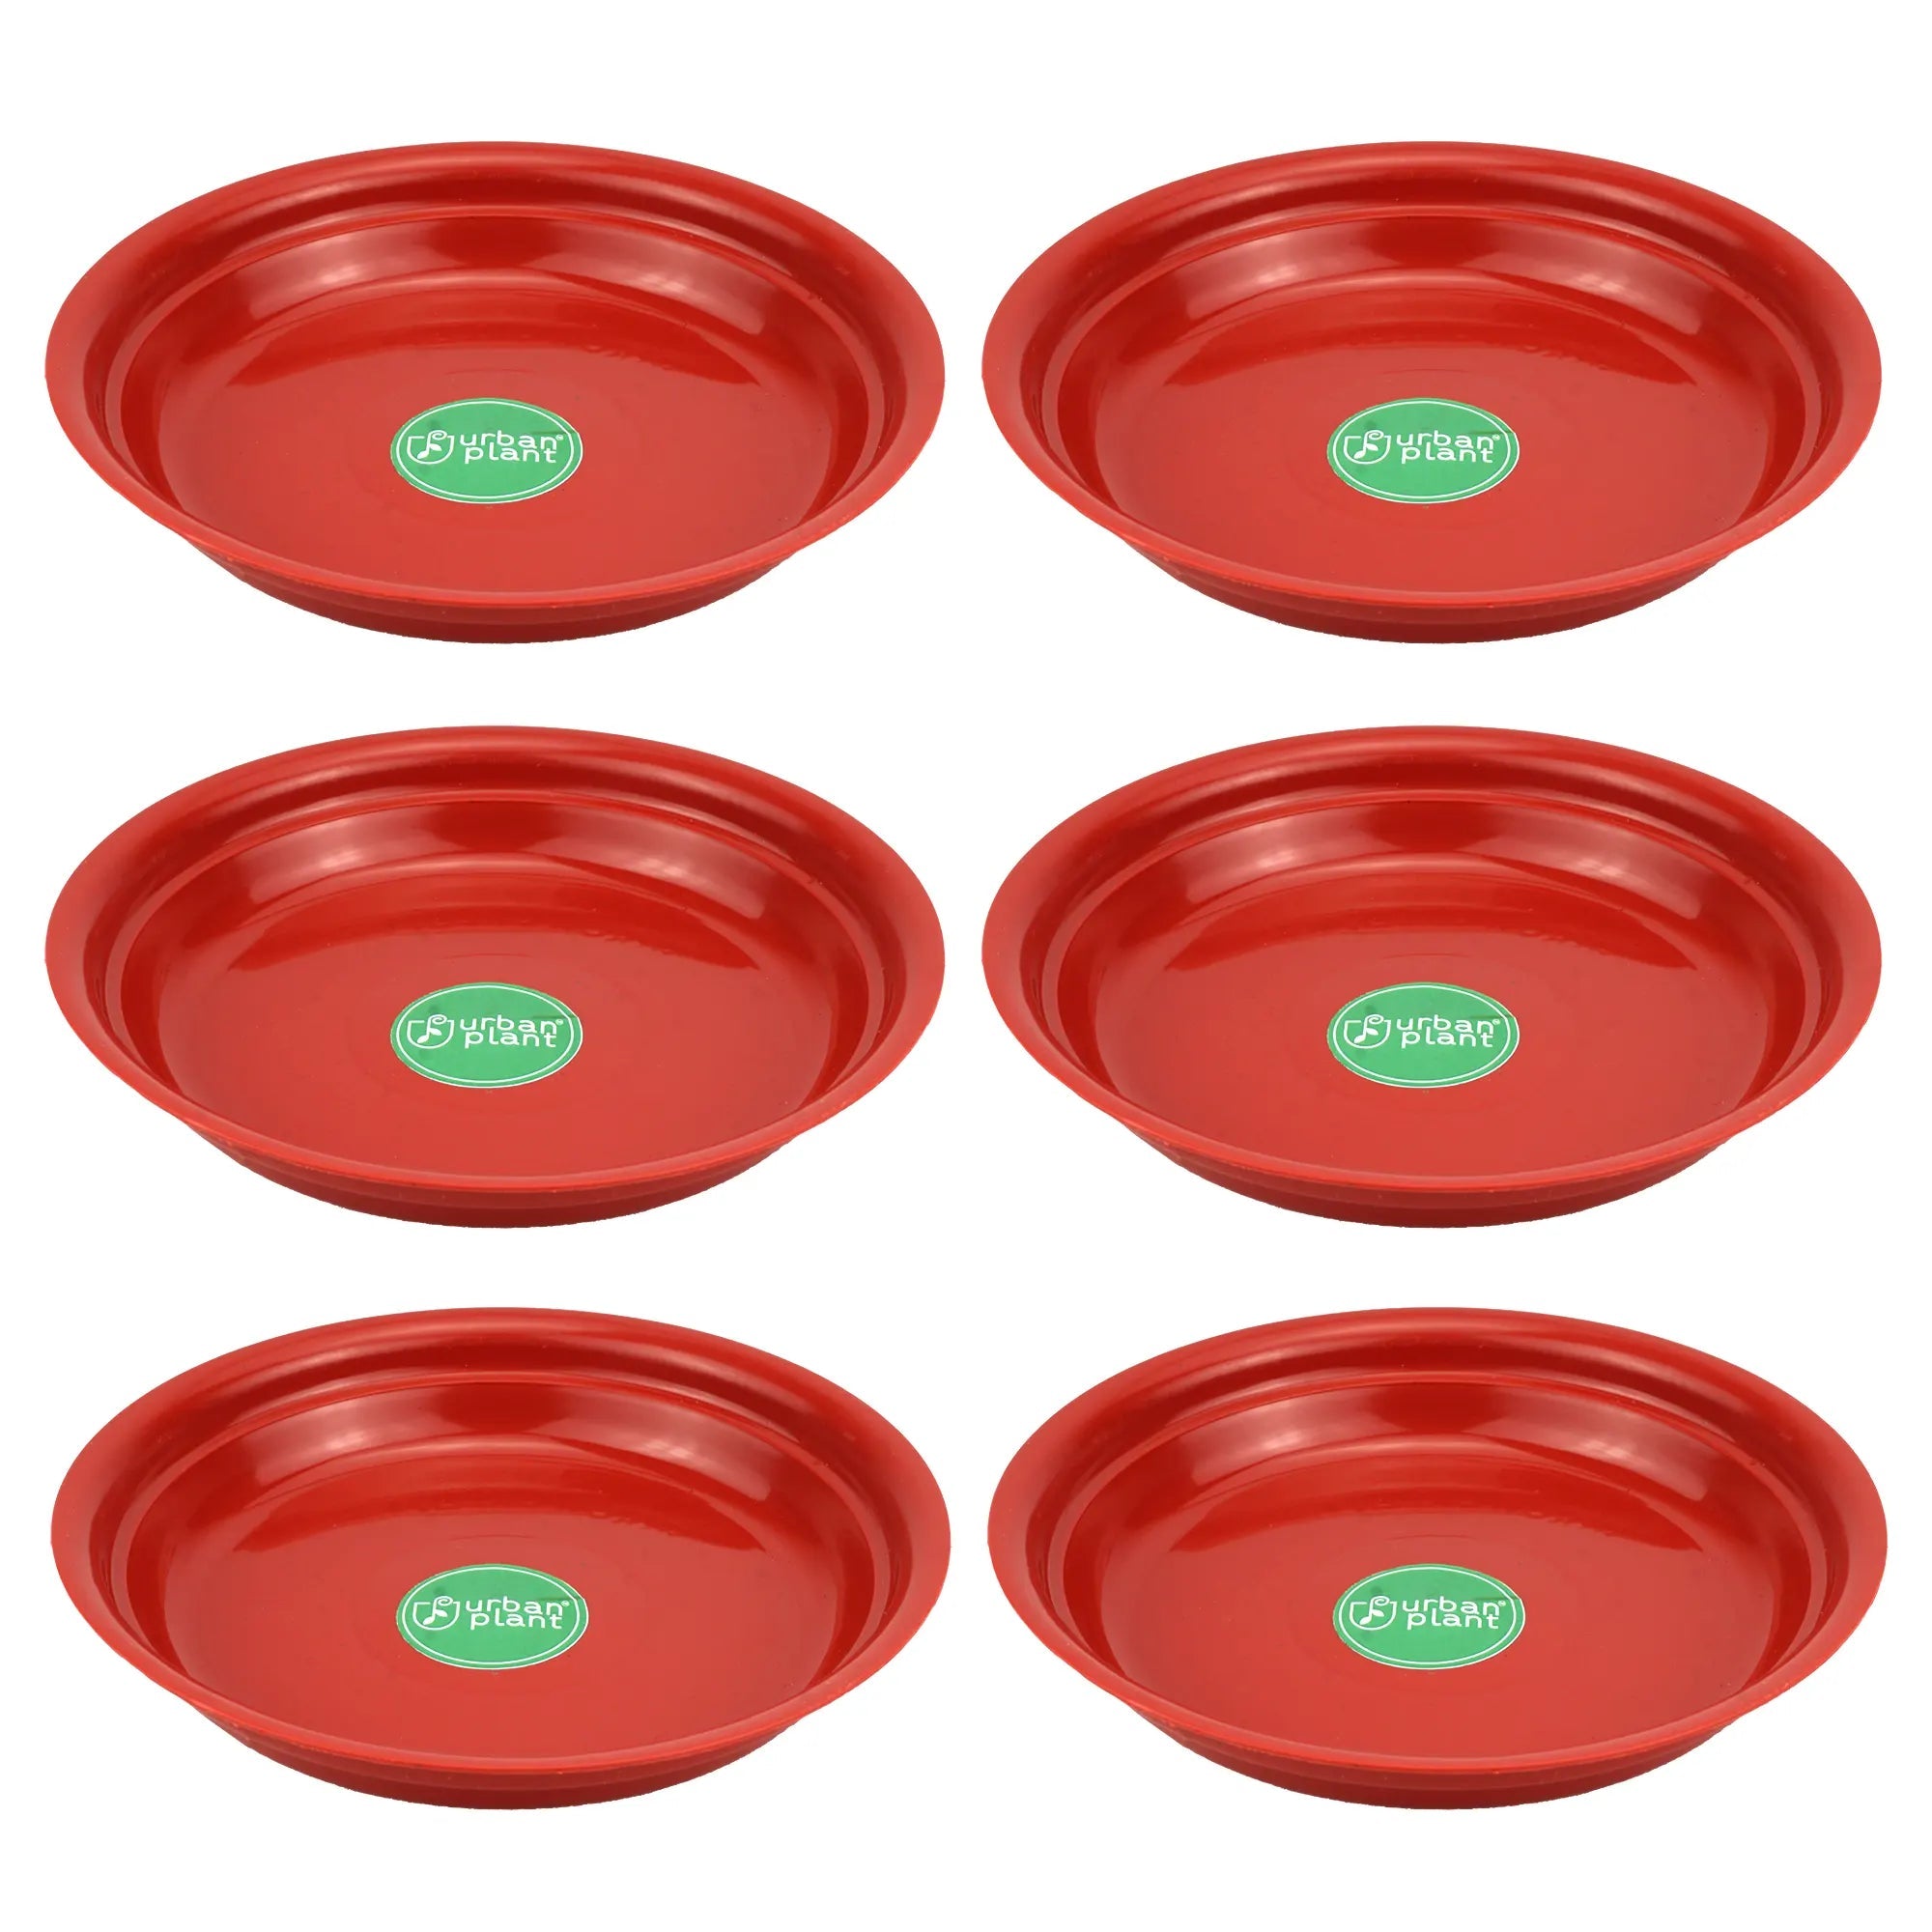 Urban Plant Round Bottom Tray (Plate/Saucer) for All Type of Pots Urban Plant 6 Inch Set of 6 